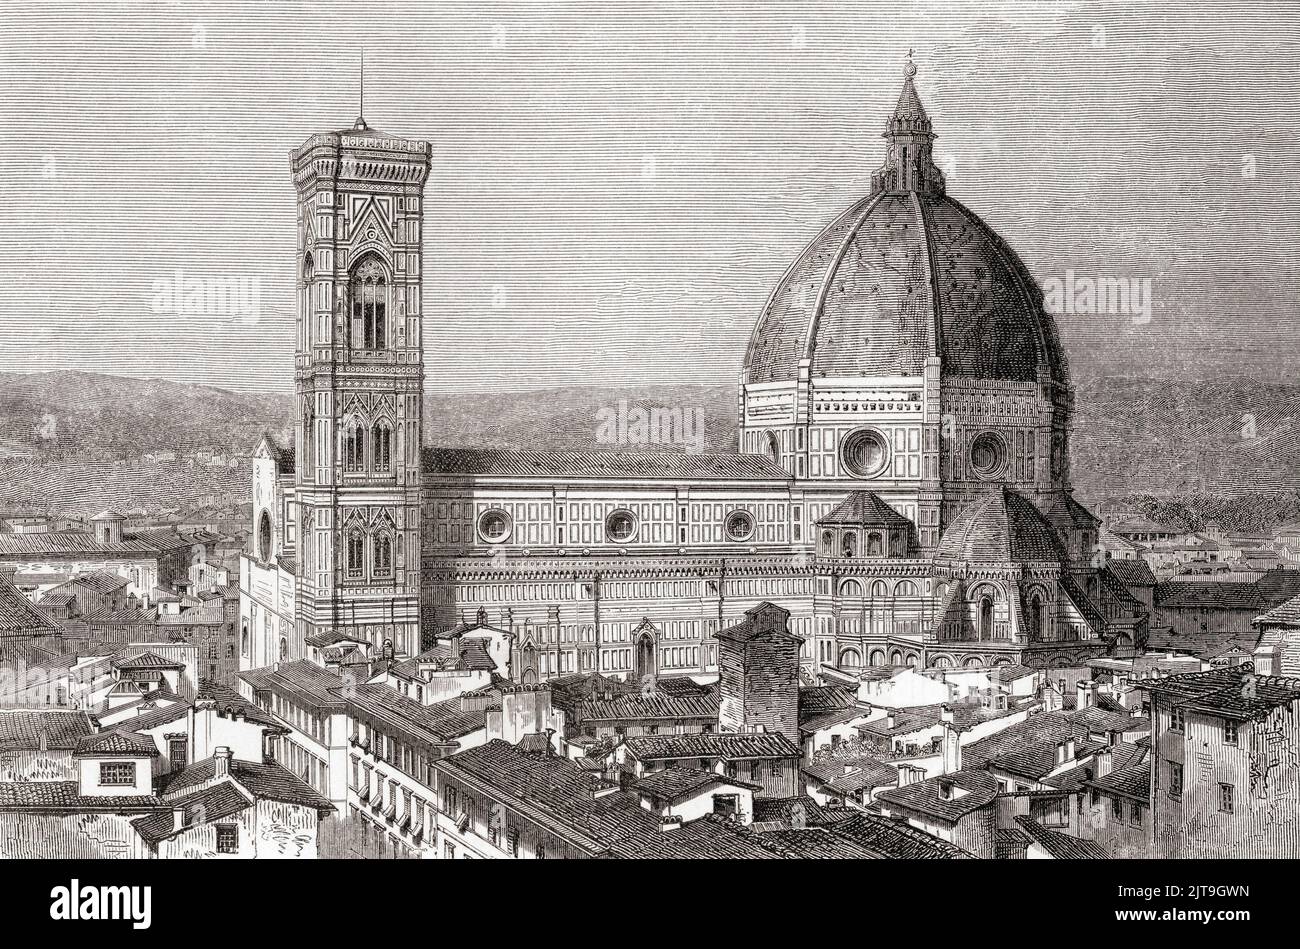 Florence Cathedral, formally the Cattedrale di Santa Maria del Fiore, Florence, Tuscany, Italy, seen here in the 19th century. Building of the Cathedral began in 1296 and was completed in 1436 in the Gothic style to a design of Arnolfo di Cambio, the dome was engineered by Filippo Brunelleschi.  From Les Plus Belles Eglises du Monde, published 1861. Stock Photo